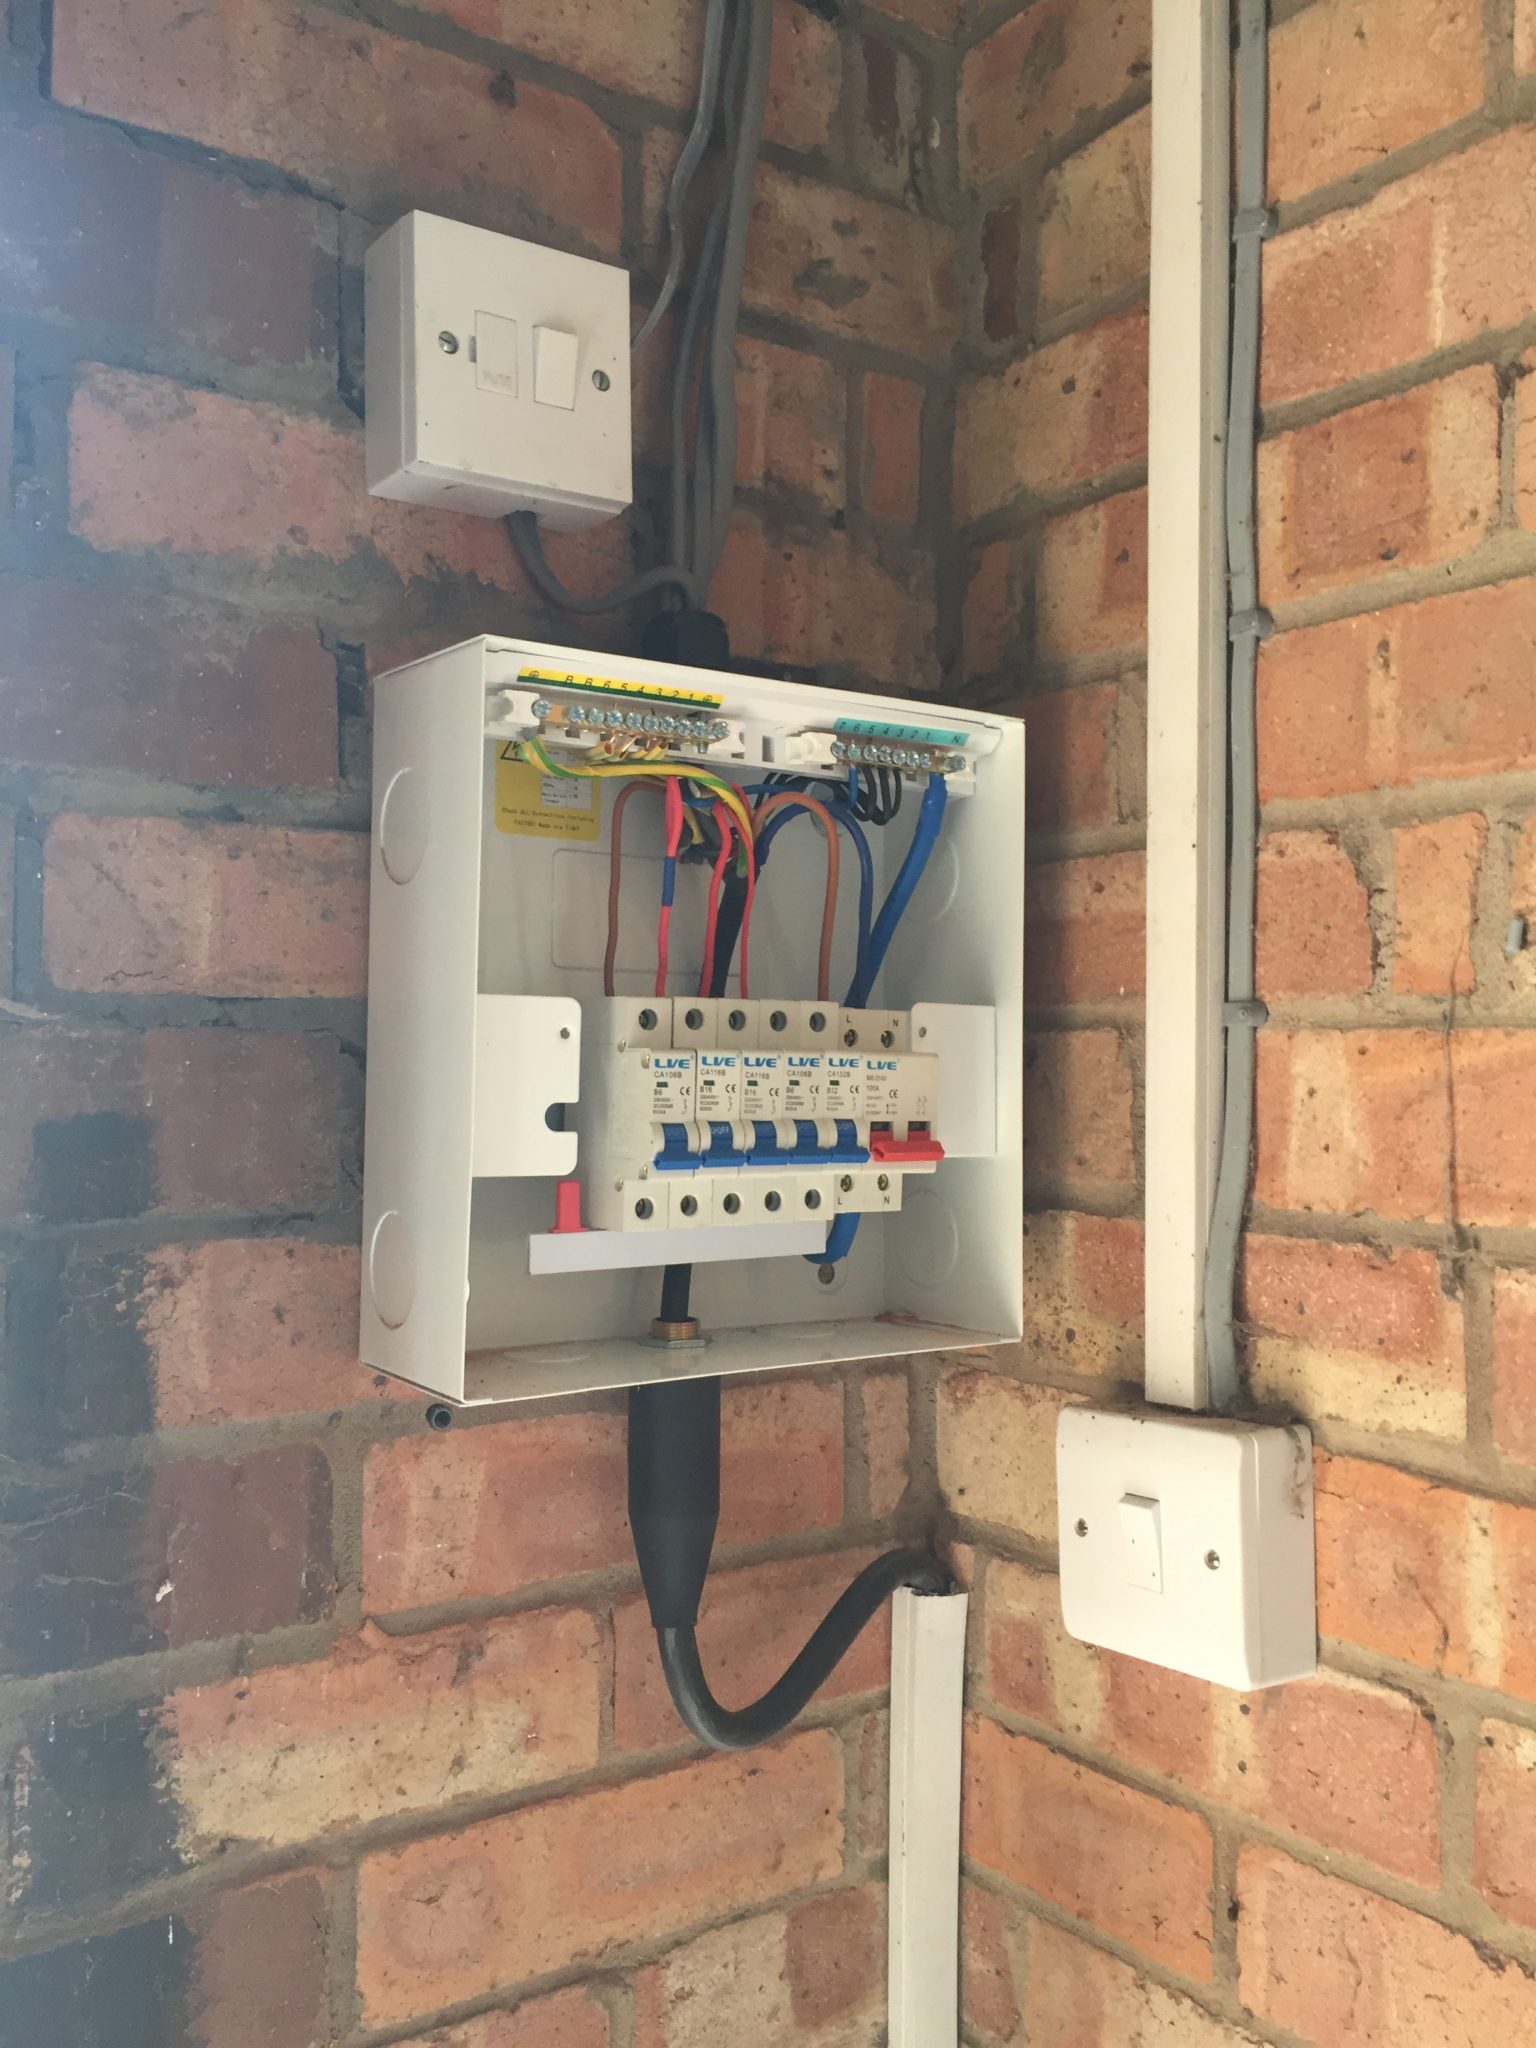 Updating the garage or shed consumer unit Case &amp; Young 